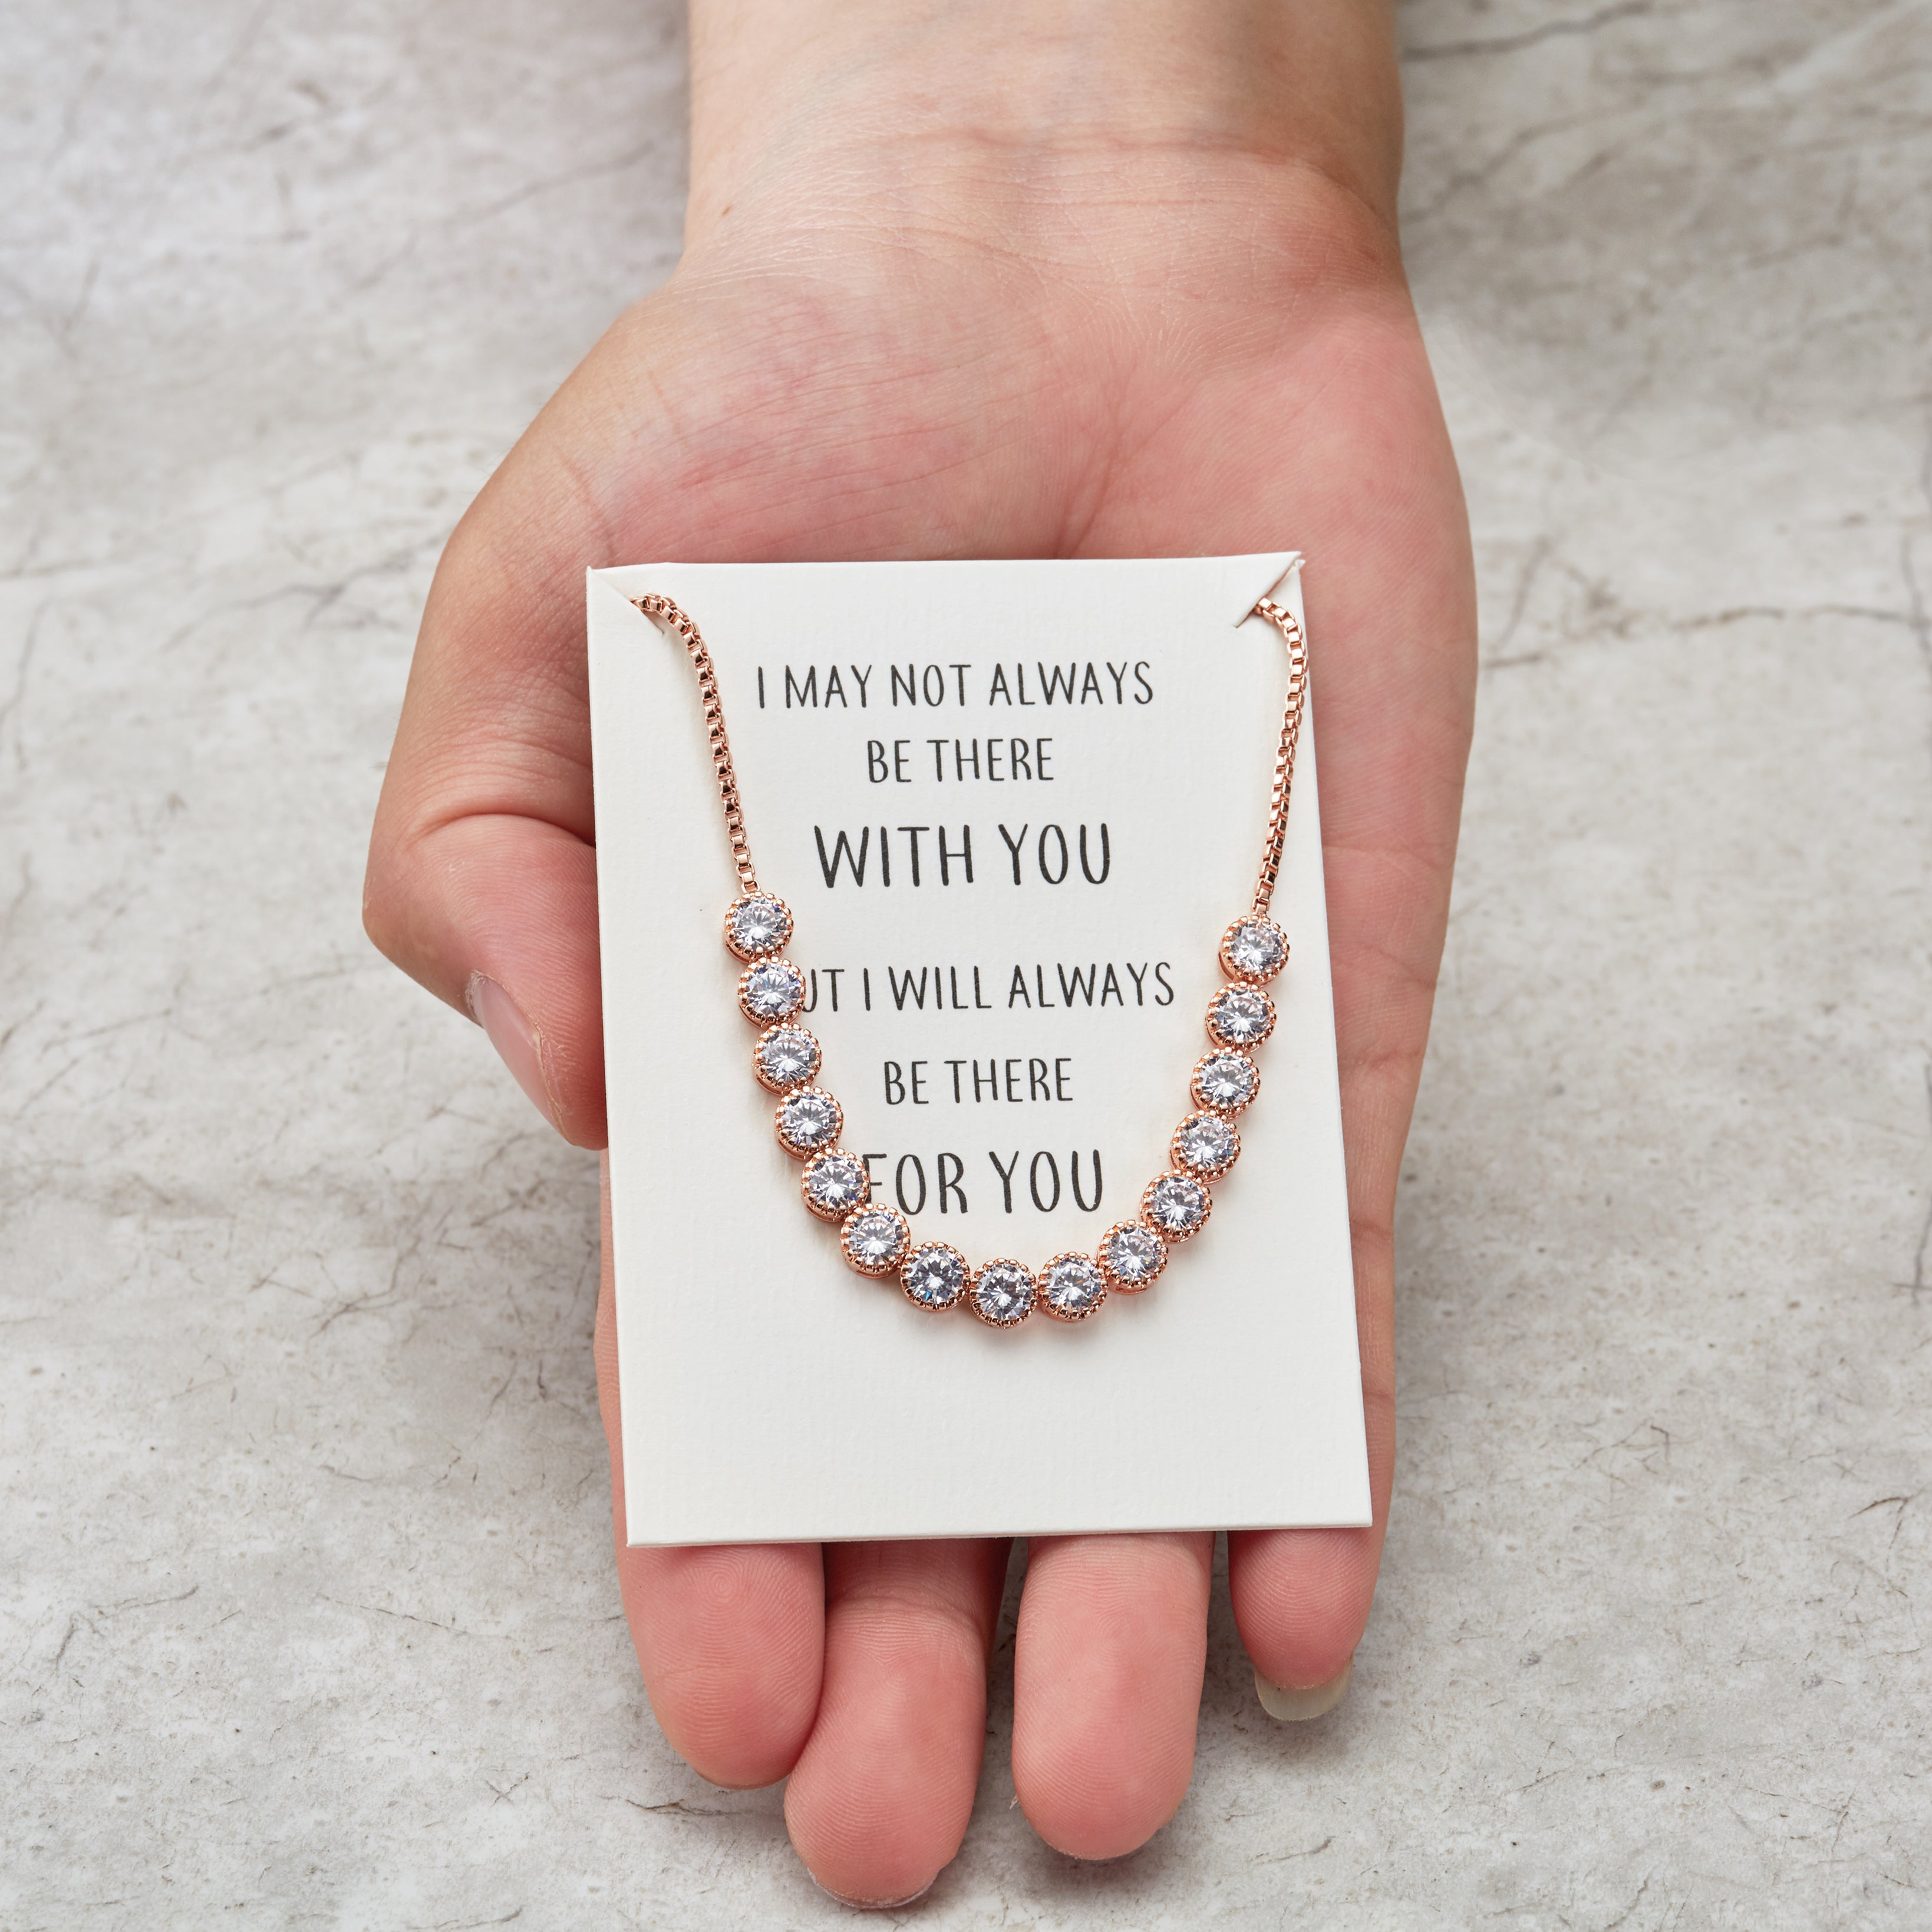 Rose Gold Plated Friendship Quote Bracelet with Zircondia® Crystals